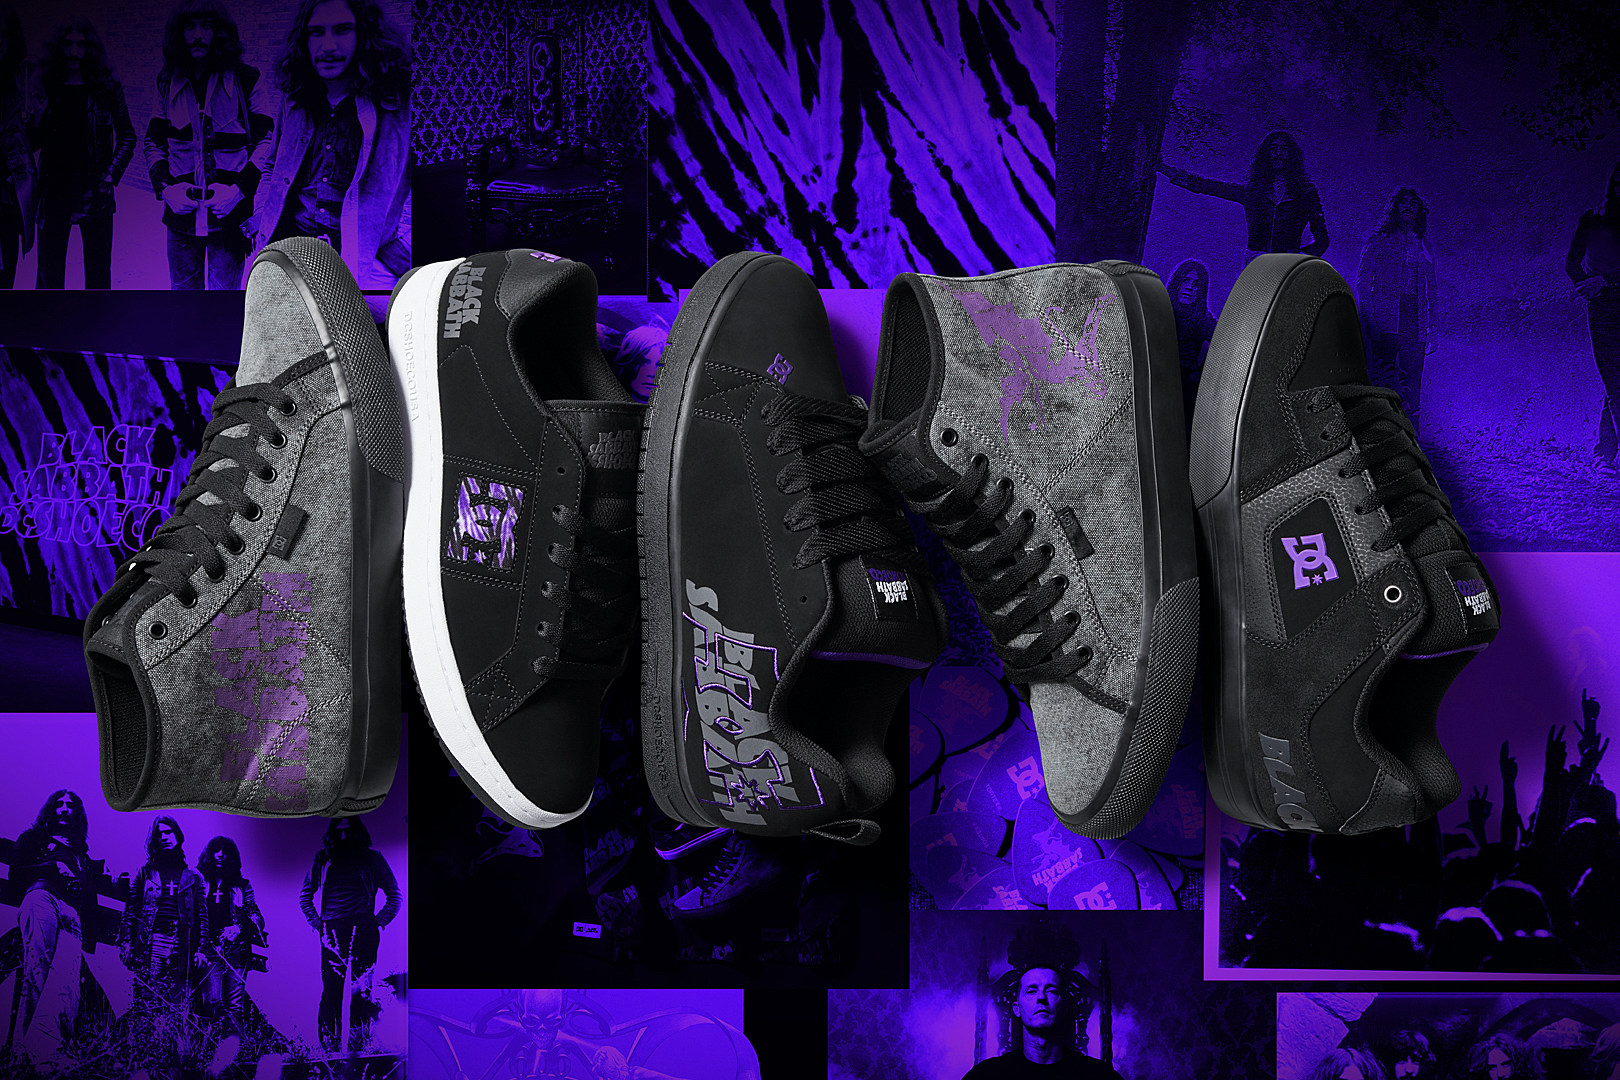 DC Shoes Partners With Black Sabbath for 'Master of Reality' Line